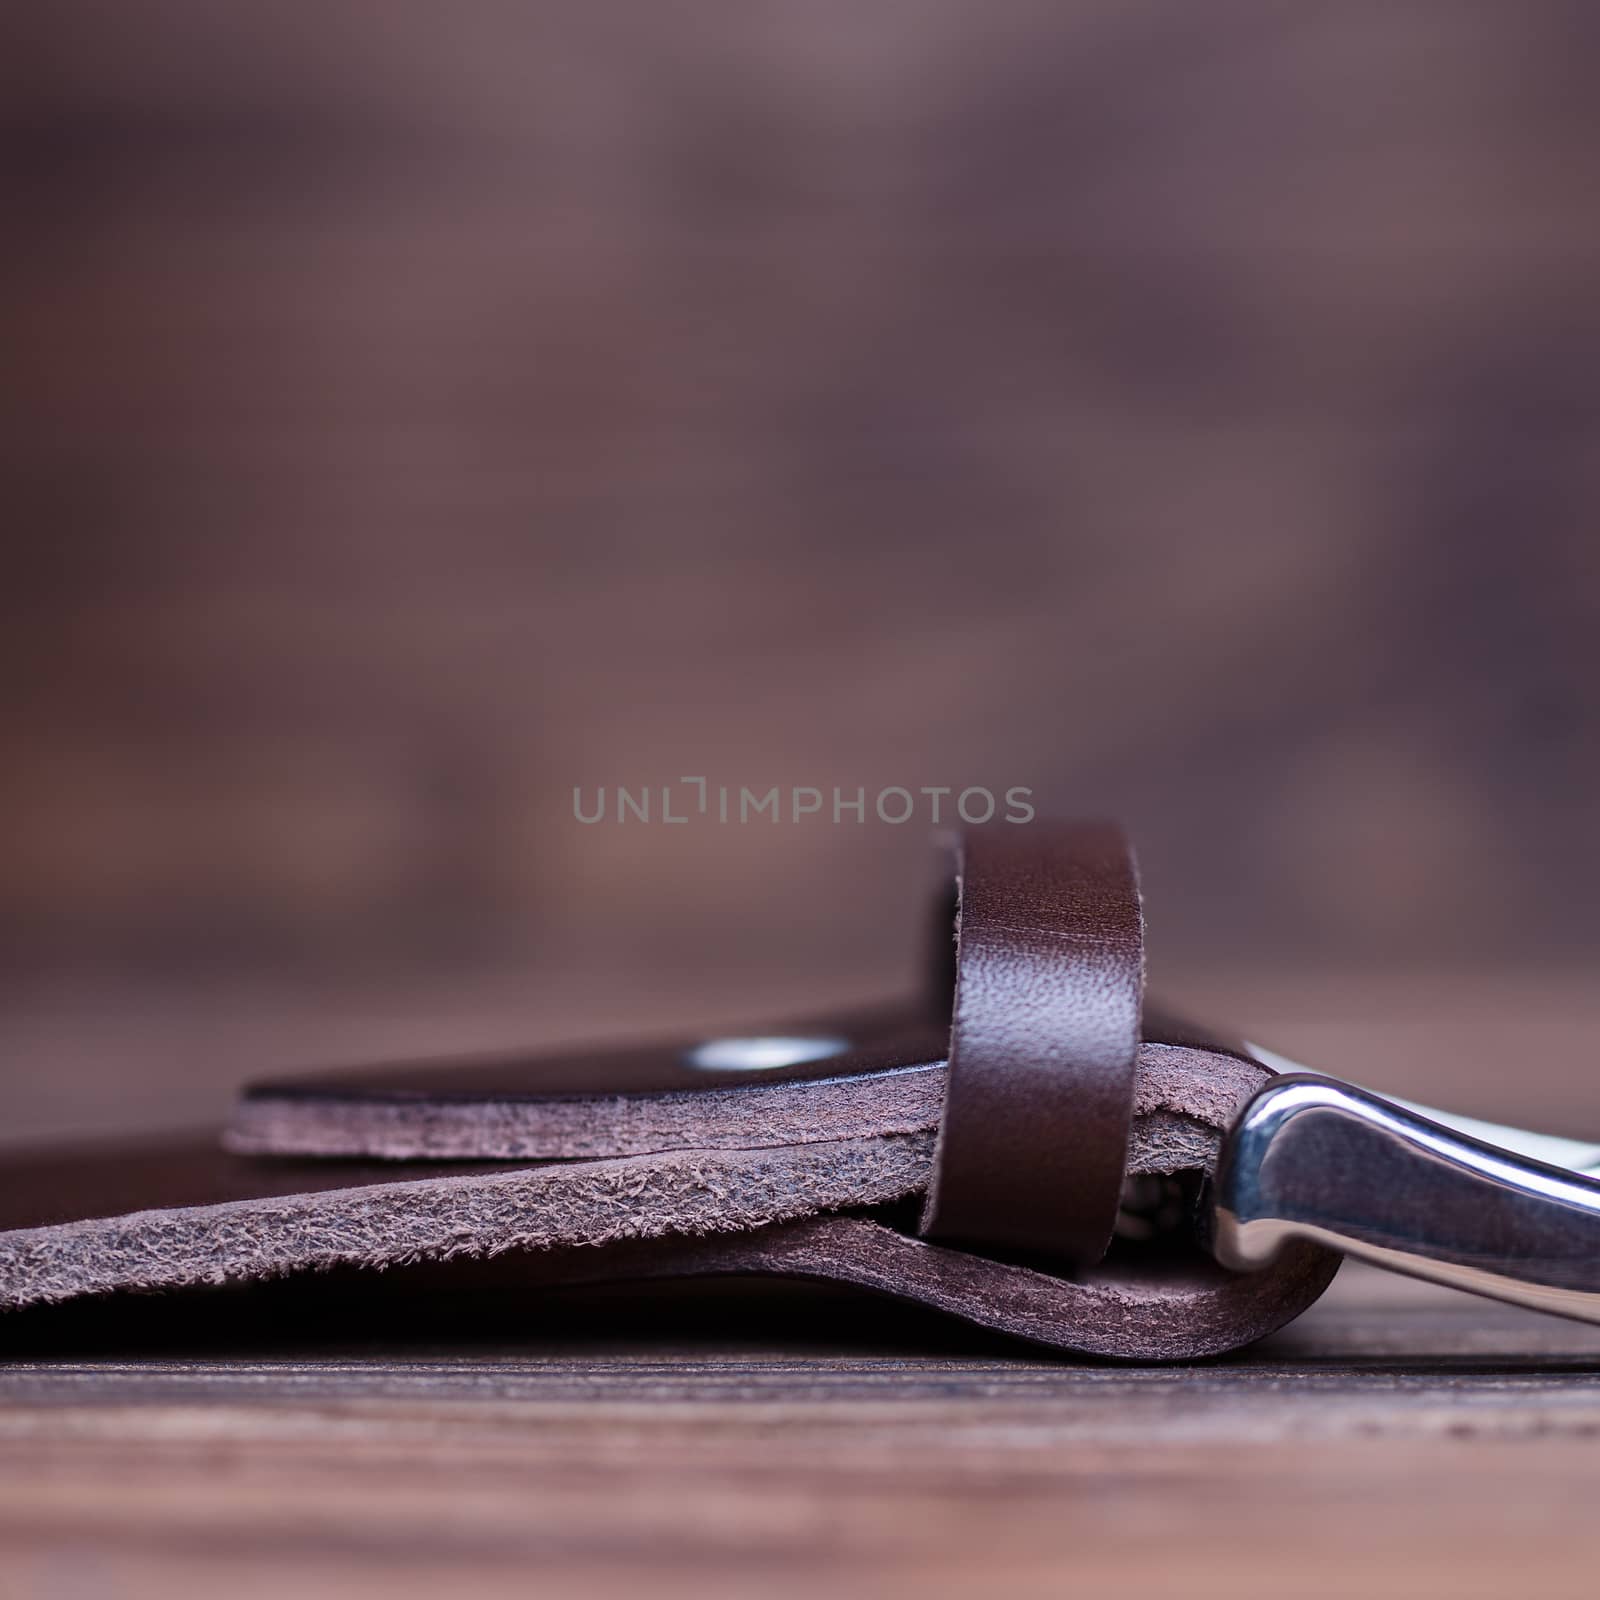 Brown handmade belt buckle lies on textured wooden background closeup. Side view. Stock photo of businessman accessories with blurred background.